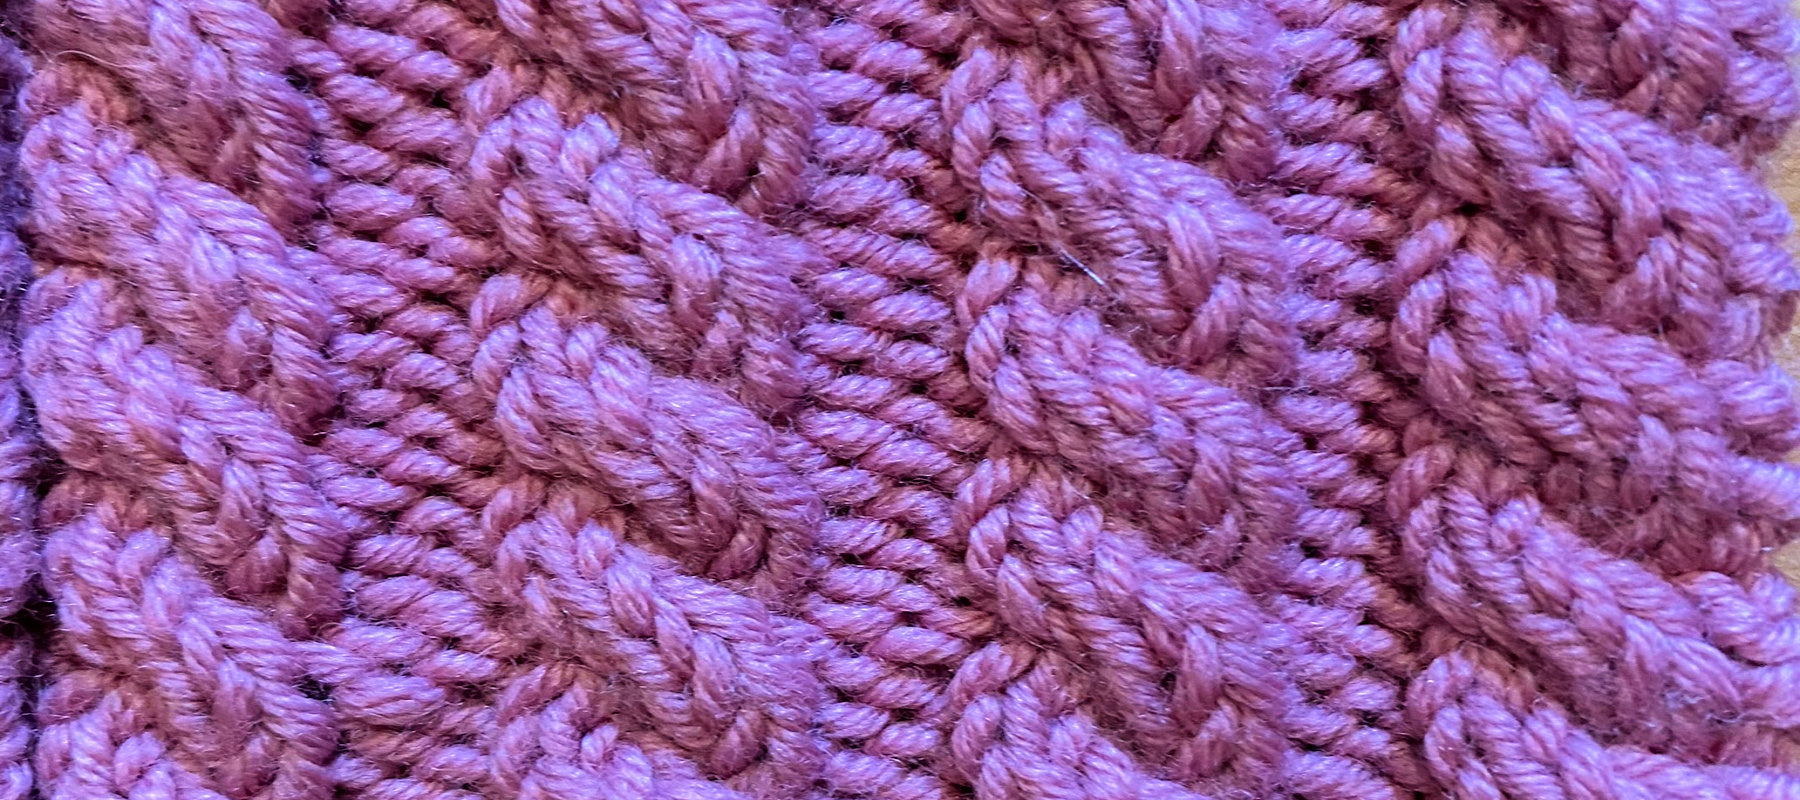 Cable Knitting: How to Count Rows Between Cable Crossings